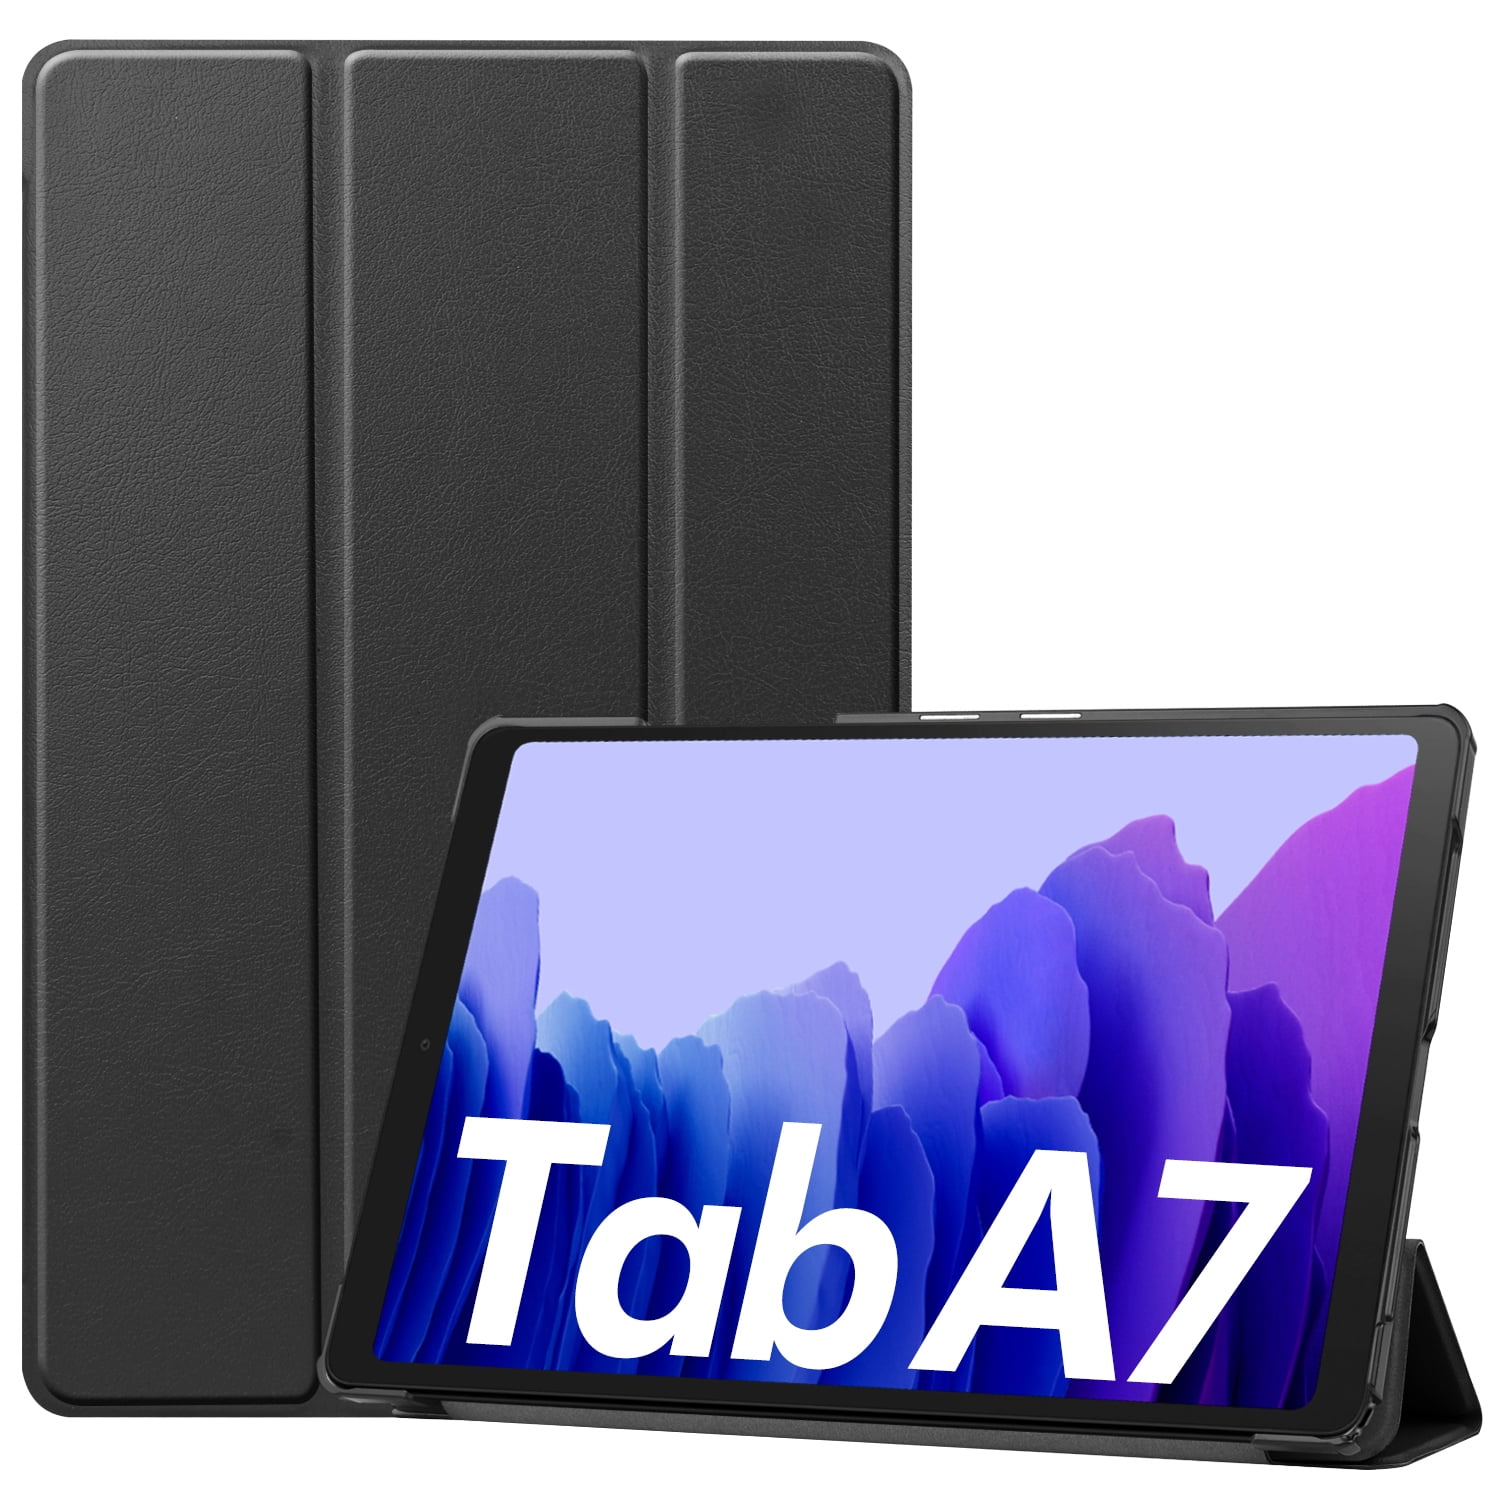 2020 Samsung Galaxy Tab A7 10.4” Inch 32 GB Wi-Fi Android 10 Touchscreen  International Tablet (Gray) Bundle – Slim Trifold Hard Shell Case and 32GB